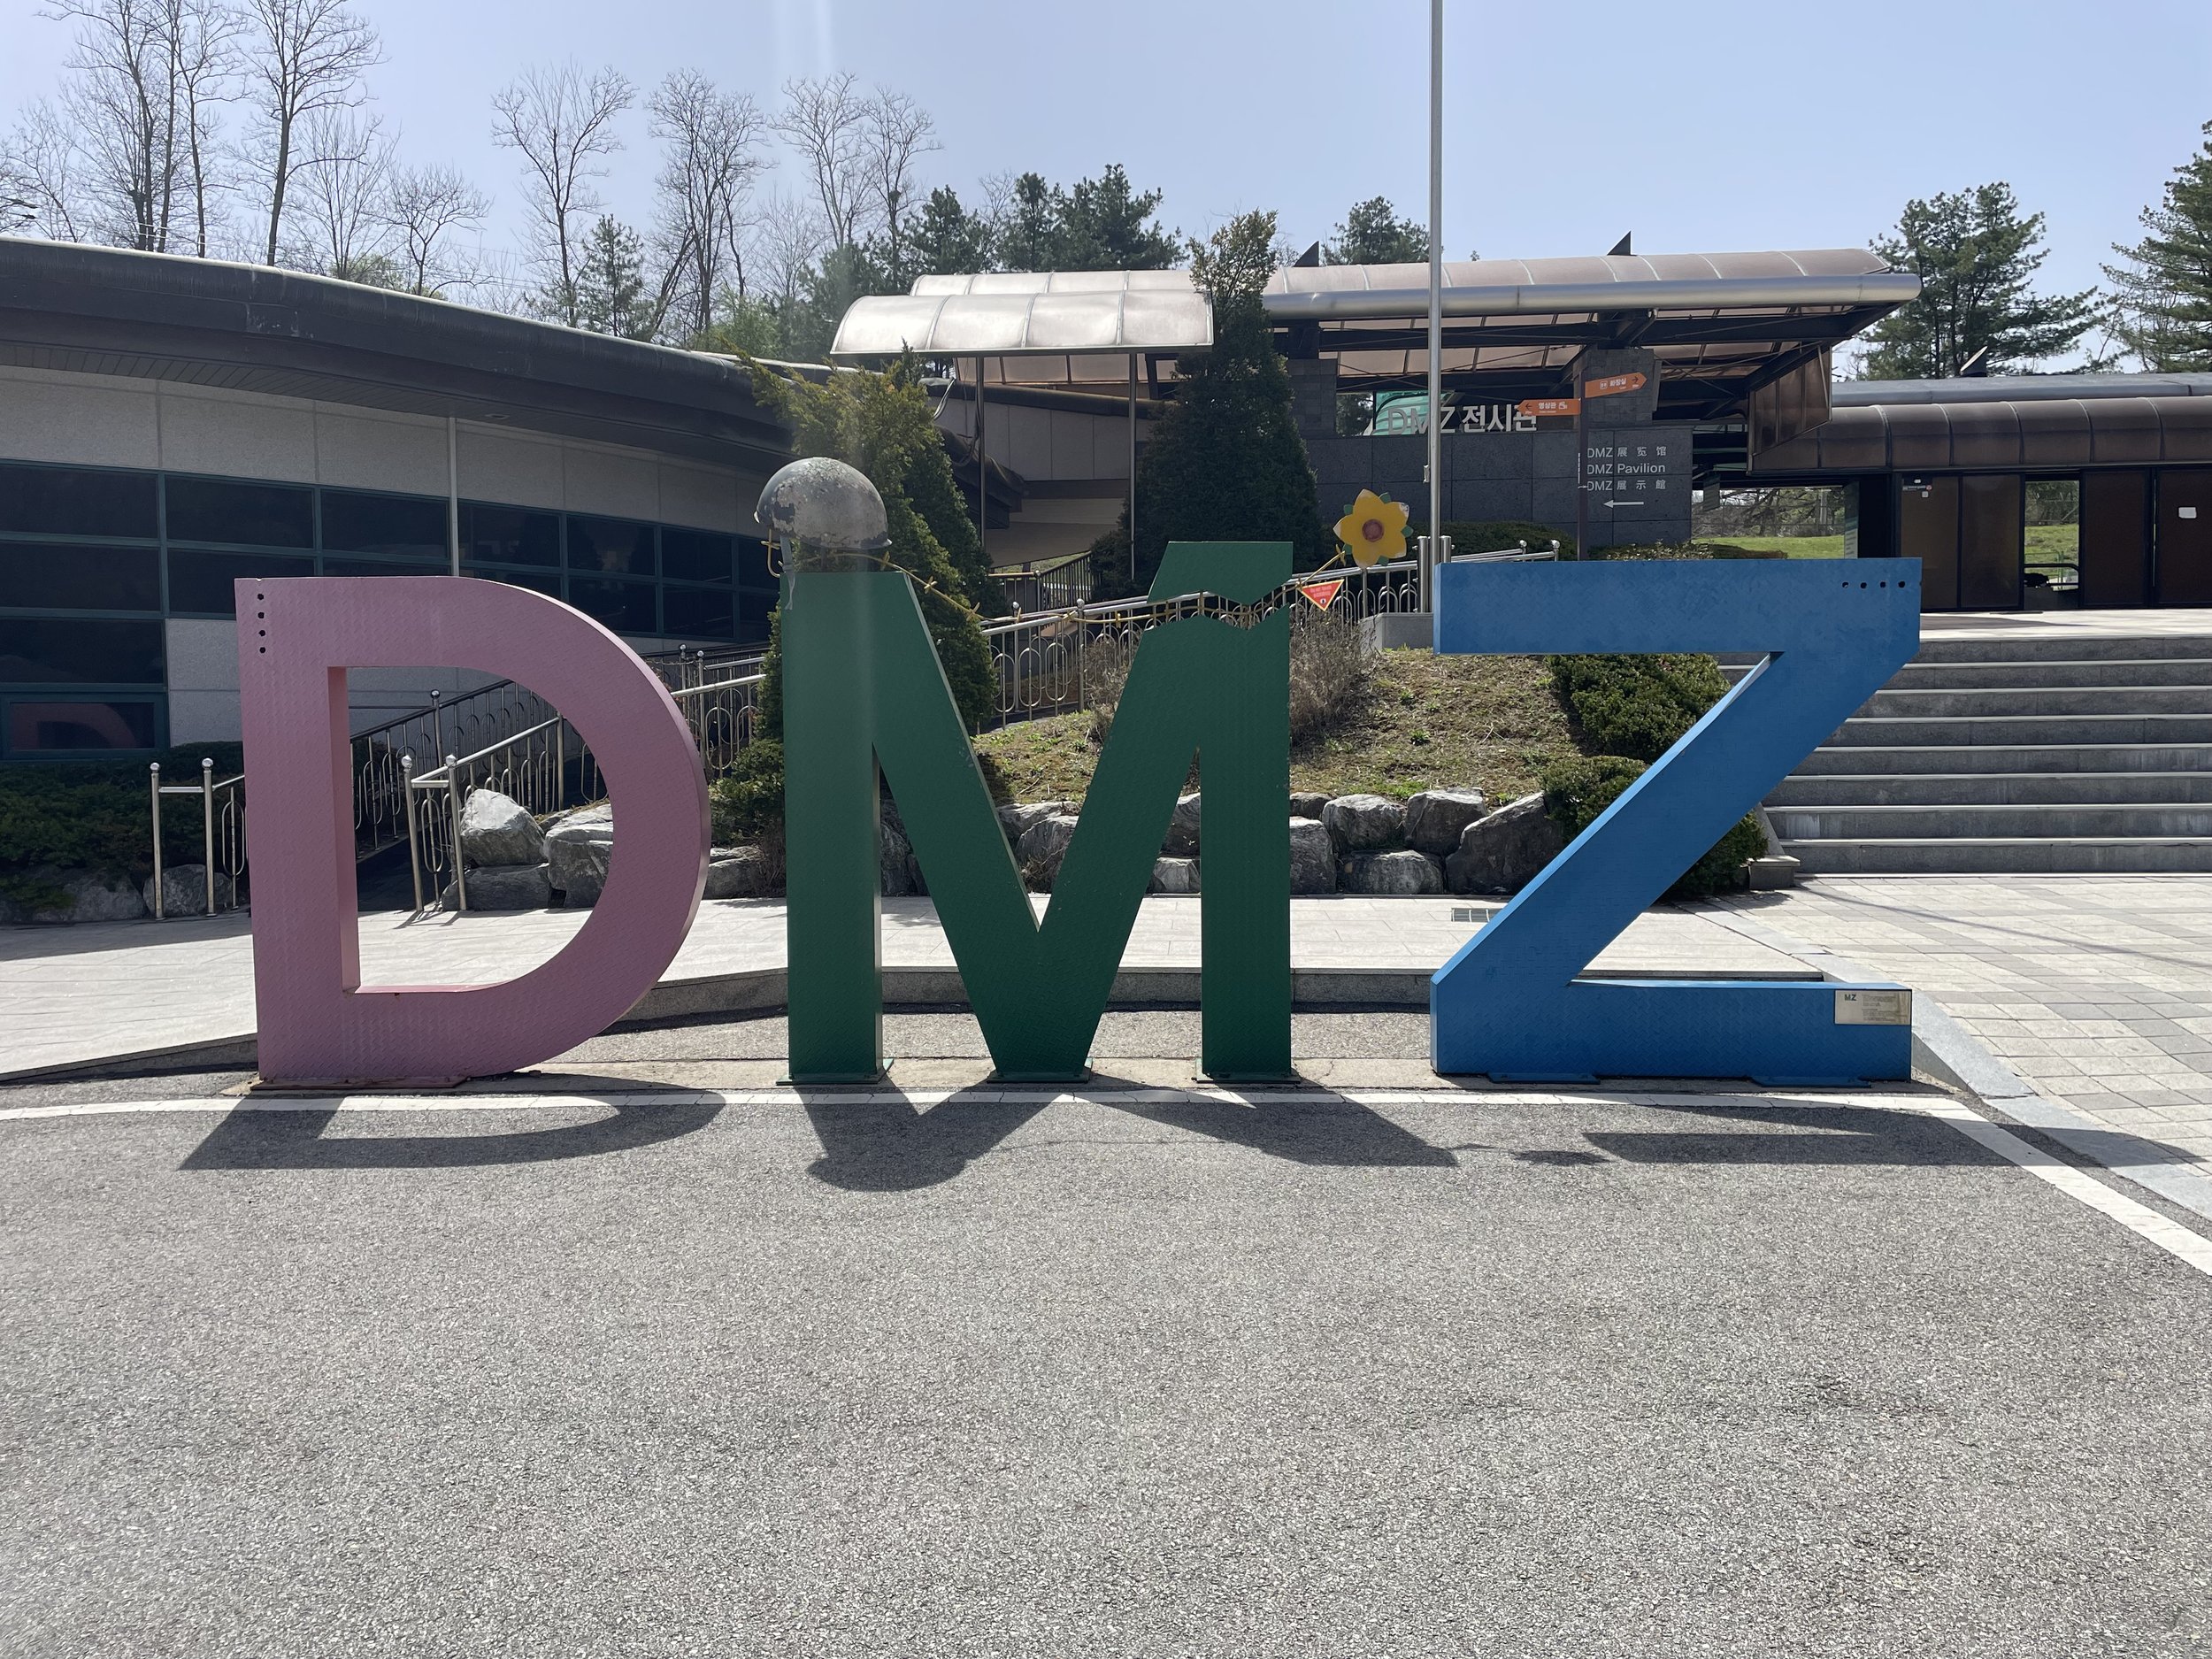 DMZ sign, but not in the DMZ